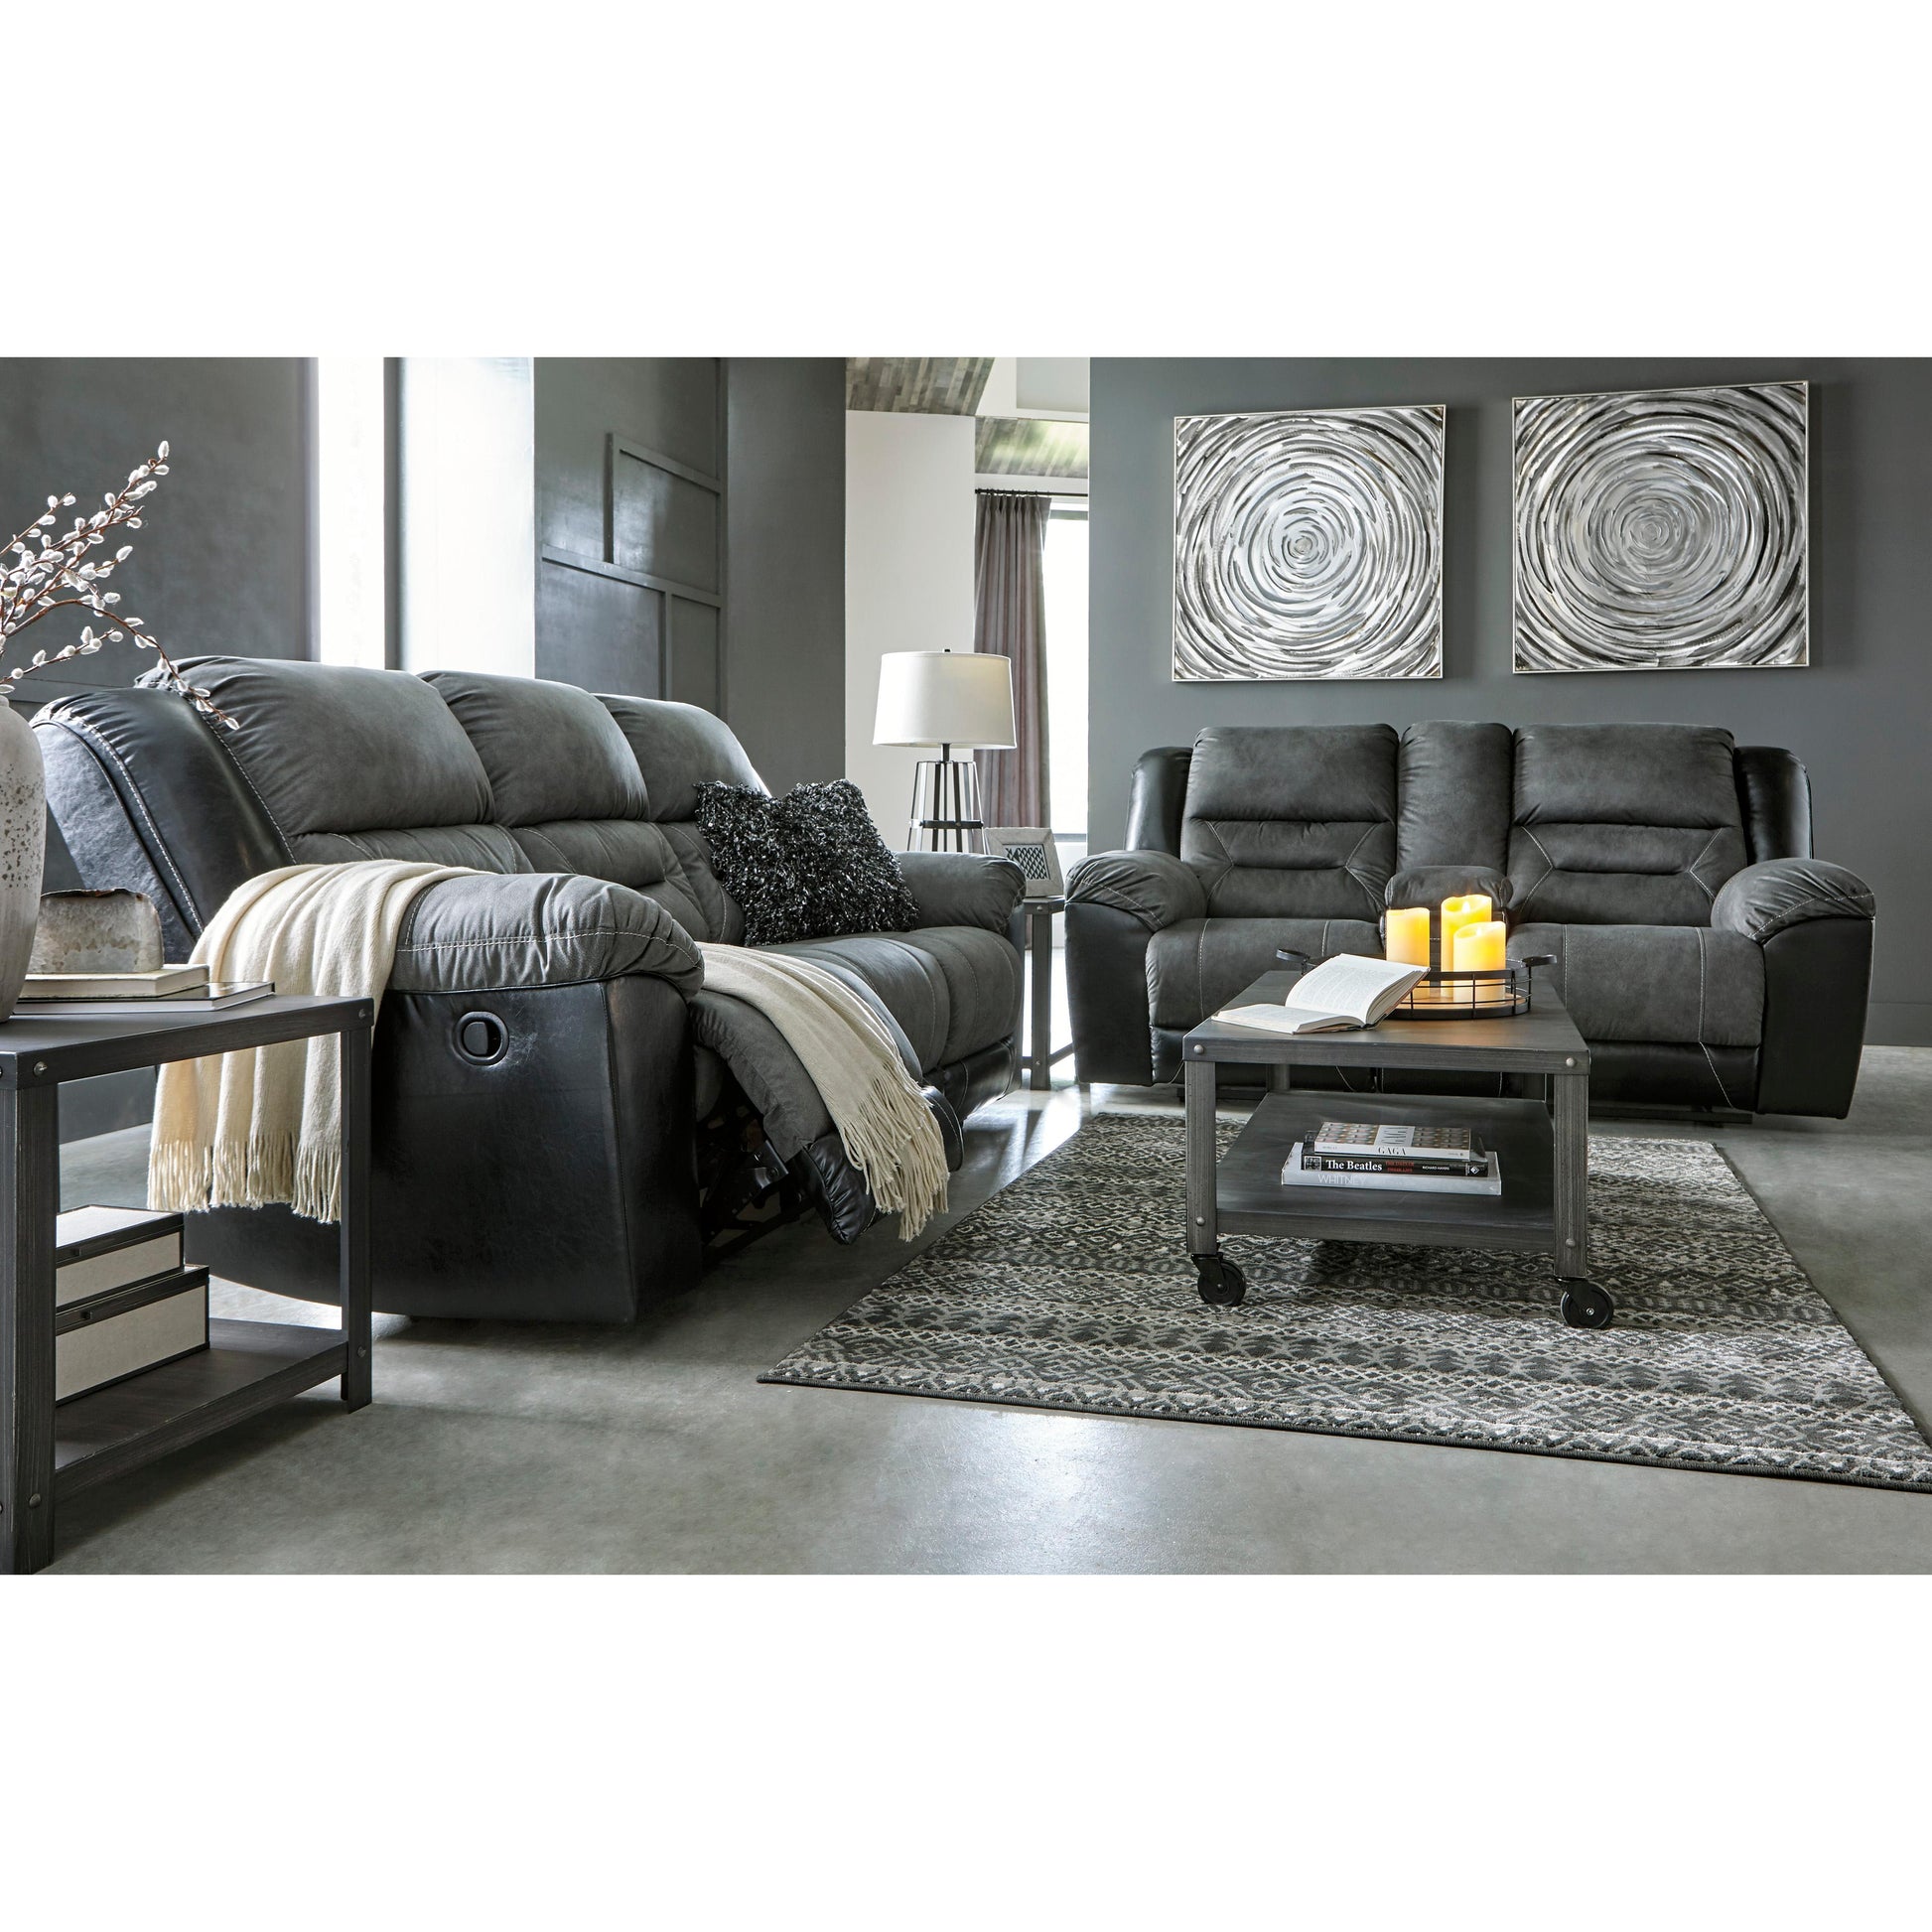 Signature Design by Ashley Earhart Reclining Fabric and Leather Look Sofa 2910288